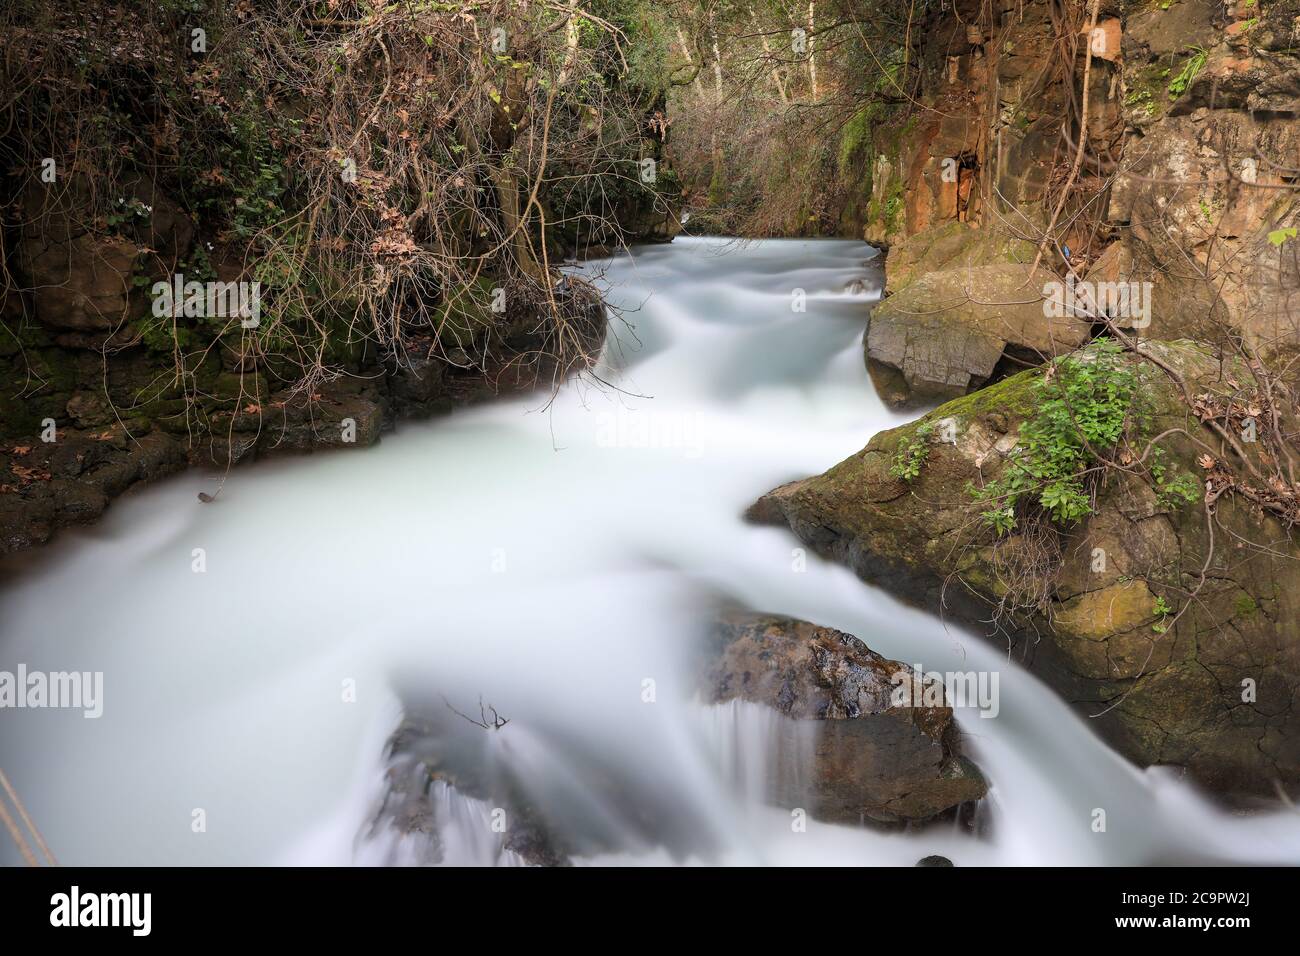 The Banias River in Israel. Long exposure photography of water flow in a river. High-quality photo Stock Photo